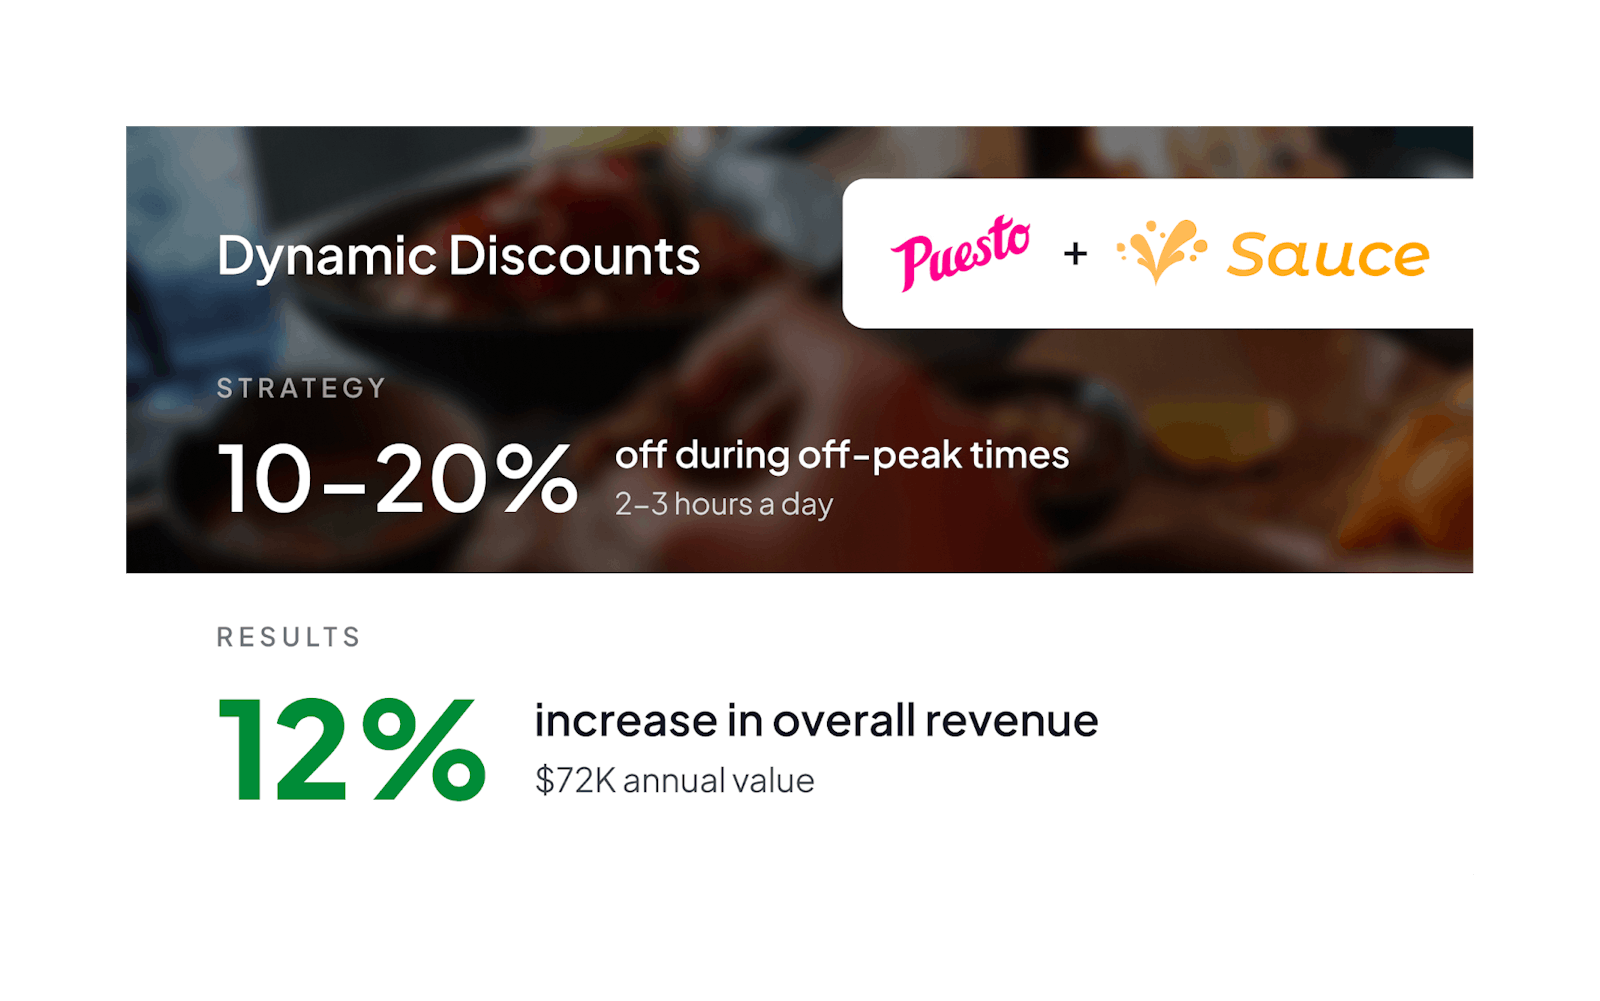 An outline of Dynamic Discounts strategy and results. 